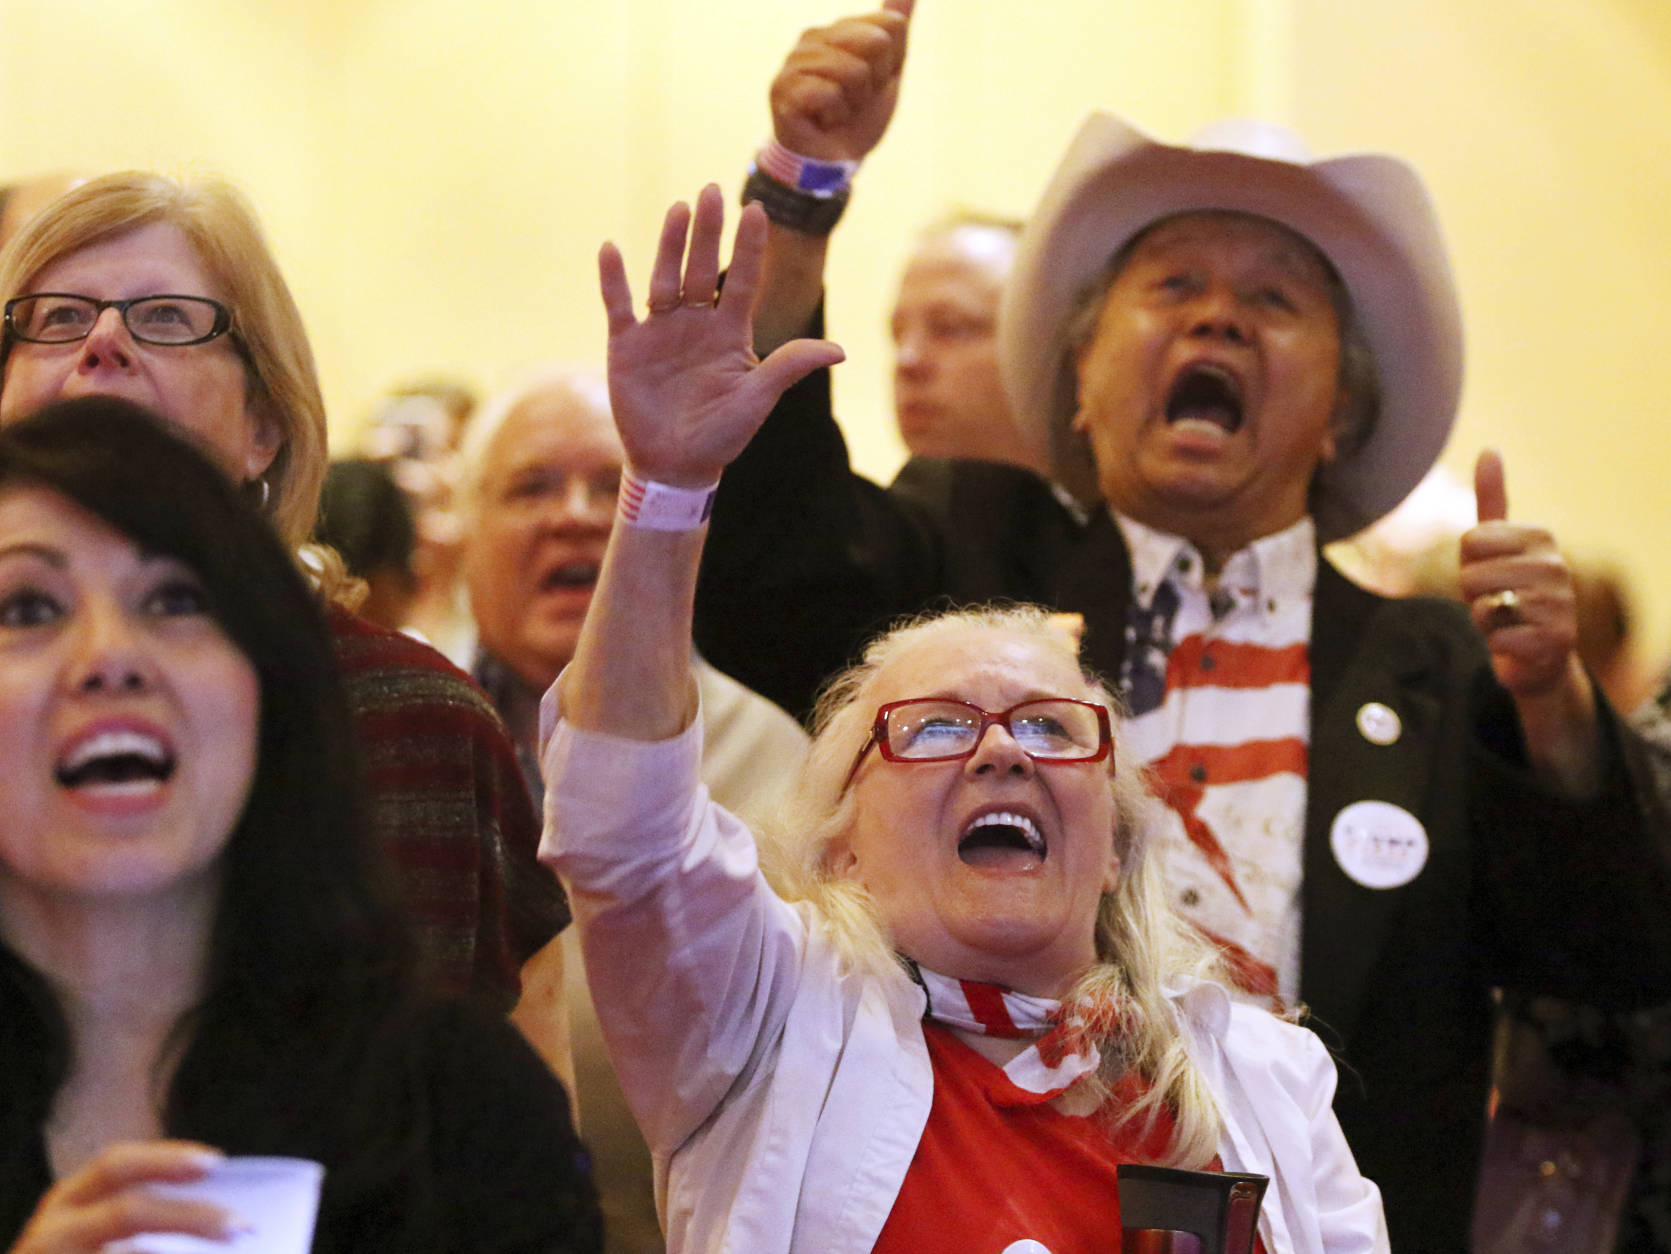 Stephanie Reeder, right, and Eddie Hamilton, back right, cheer during an election night watch party hosted by the Nevada GOP, Tuesday, Nov. 8, 2016, at South Point hotel-casino in Las Vegas. (AP Photo/Ronda Churchill)